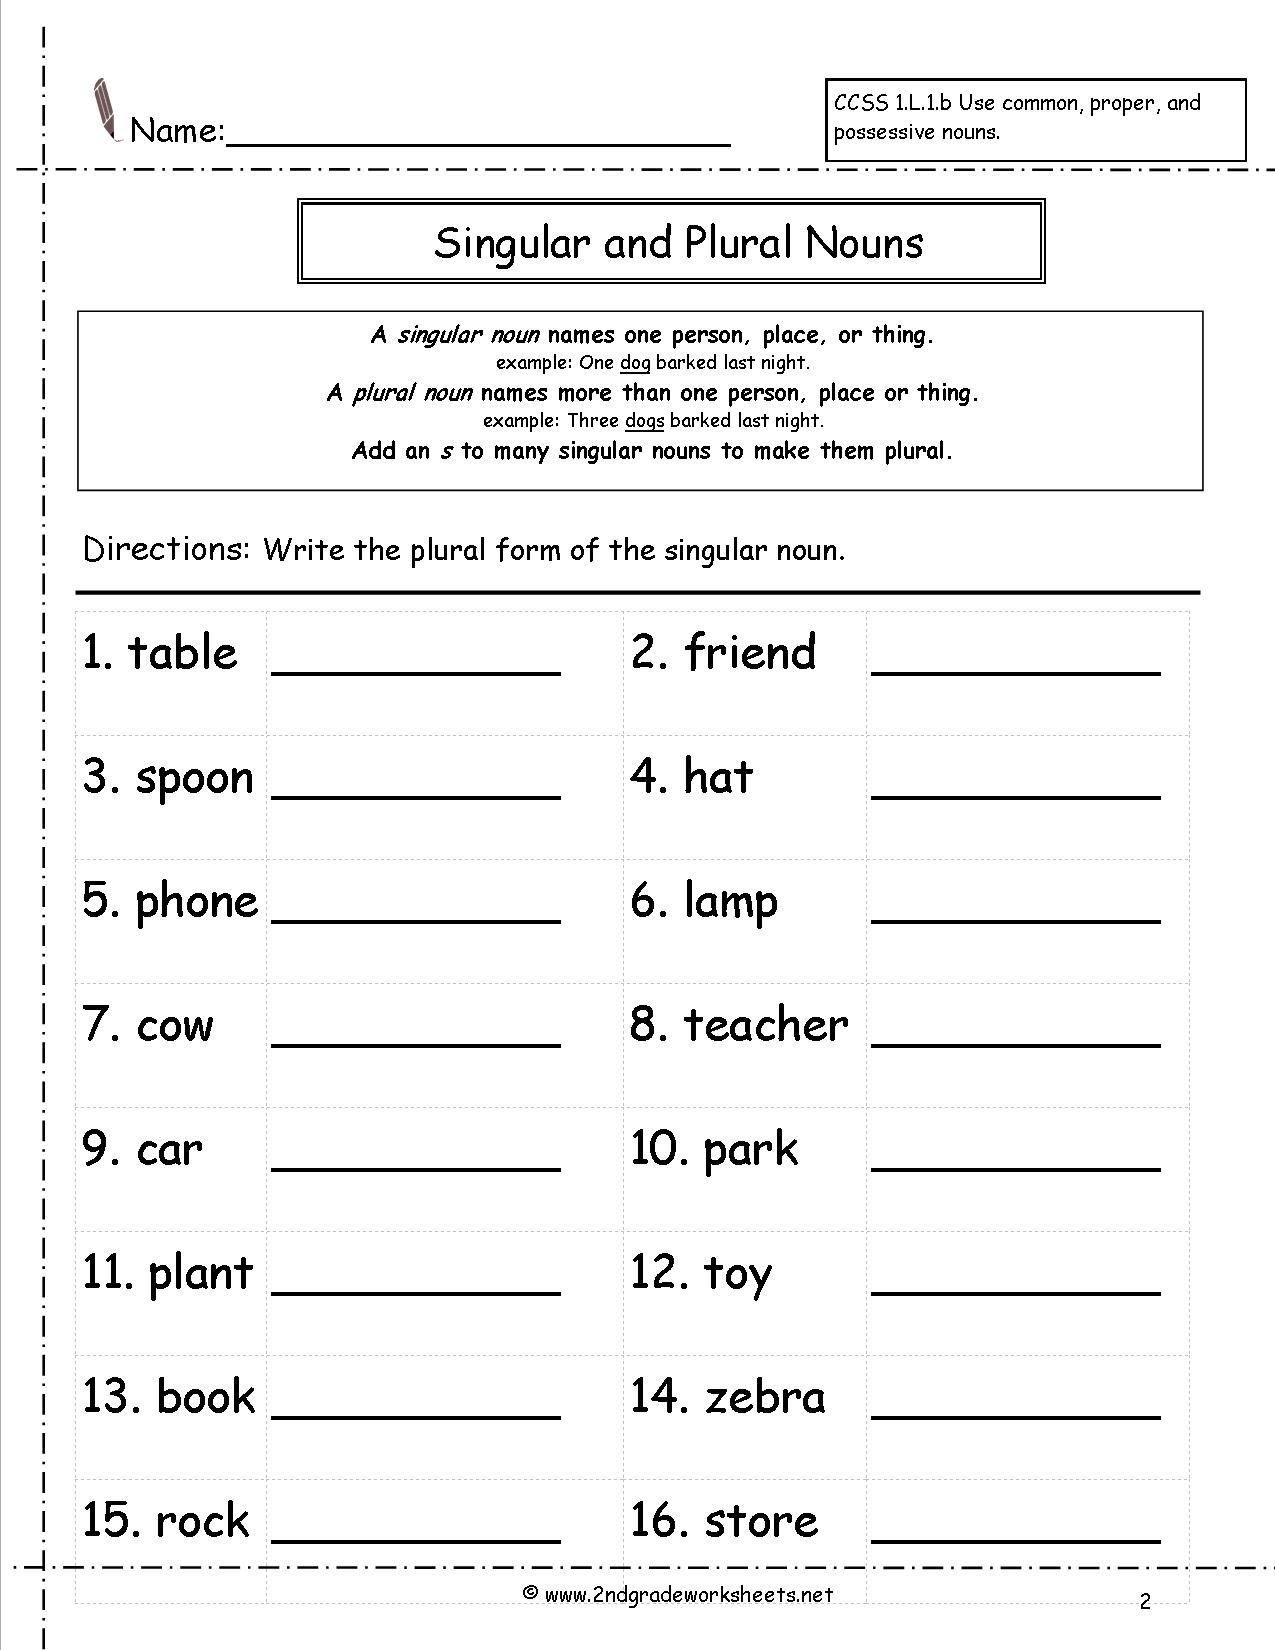 Singular And Plural Nouns Exercises Pdf With Answers